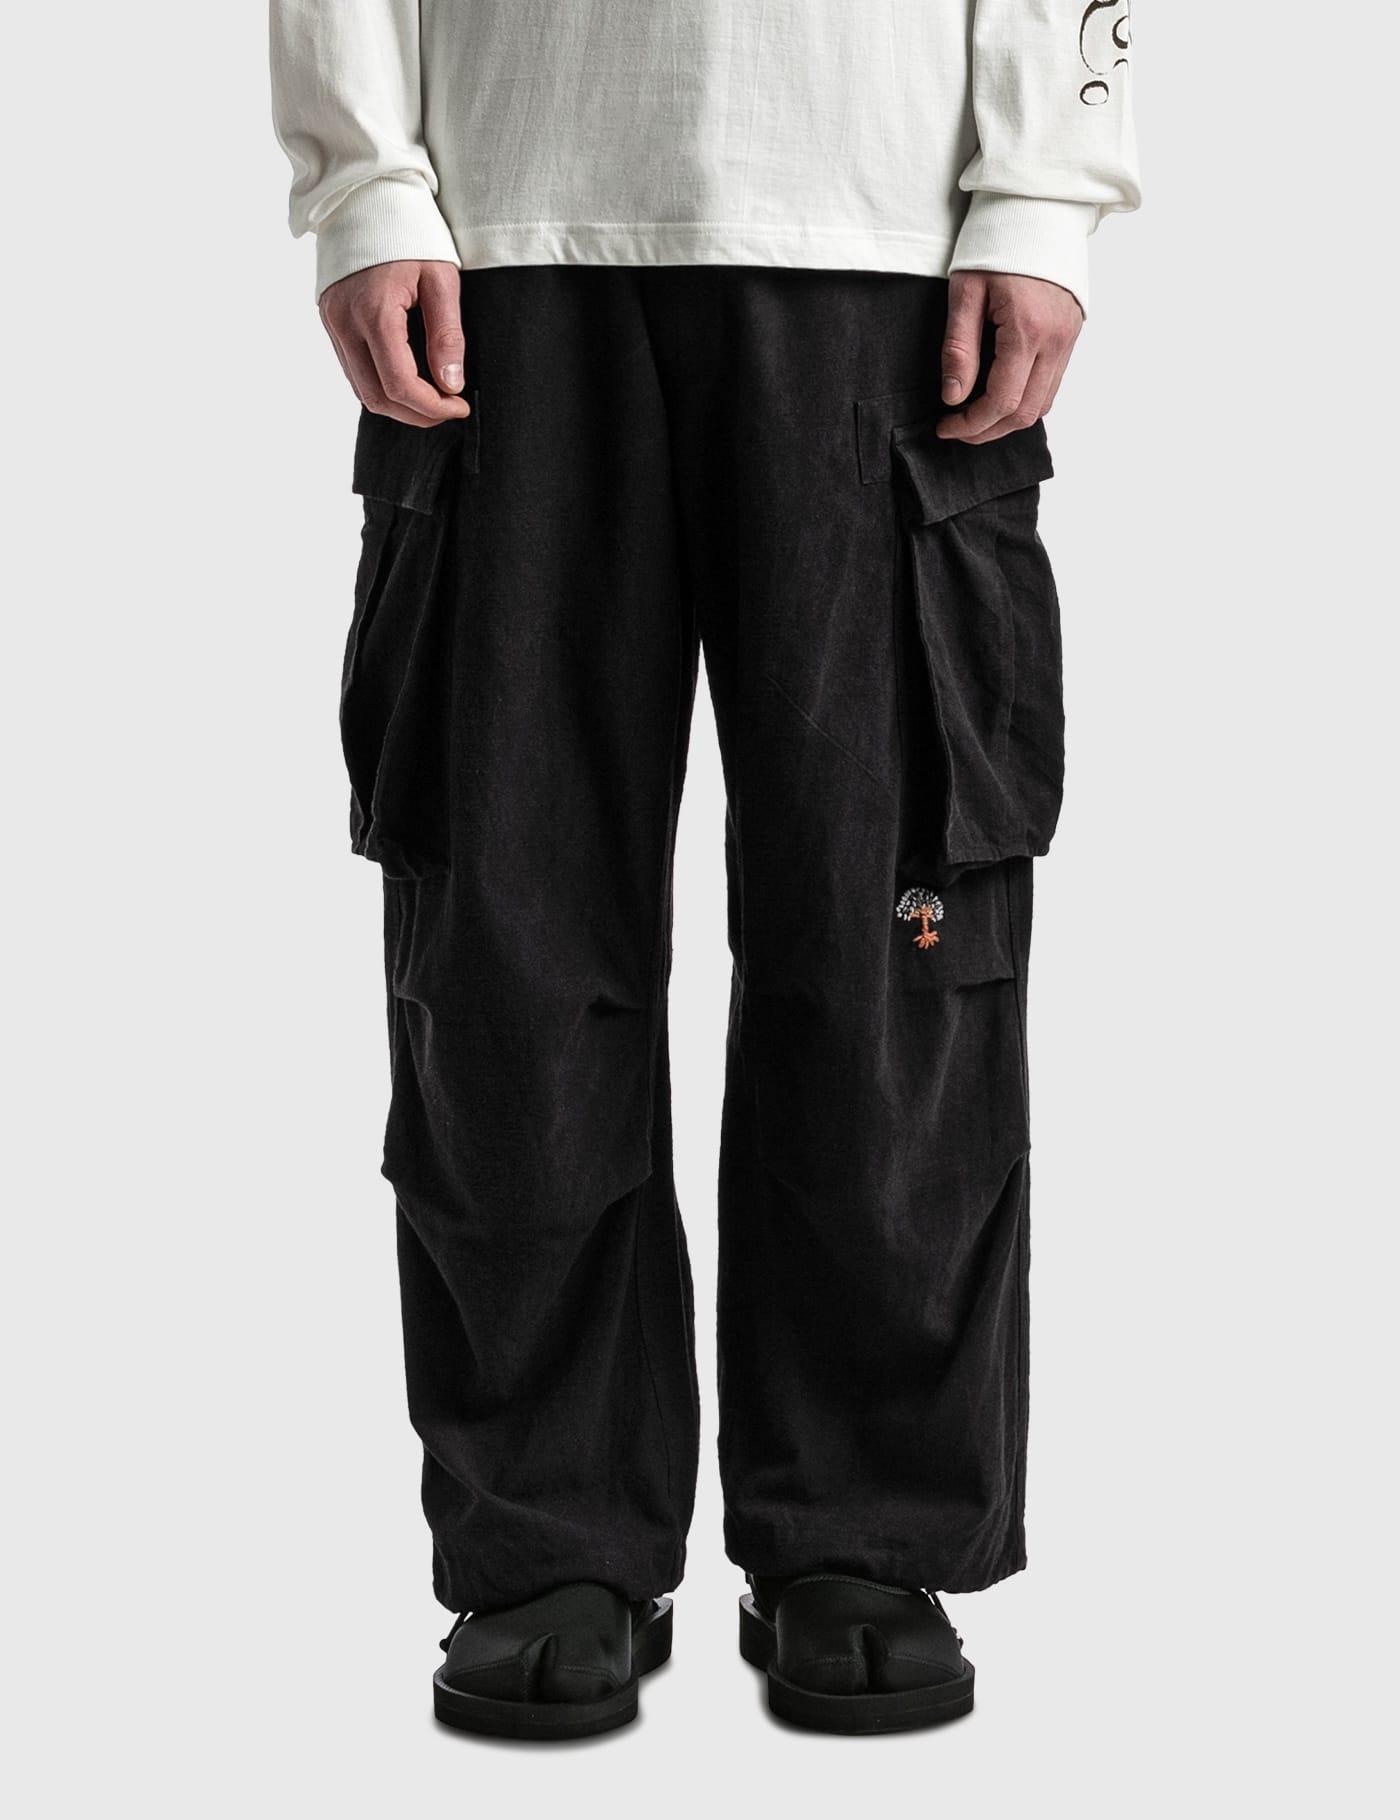 Story Mfg - Peace Pants | HBX - Globally Curated Fashion and